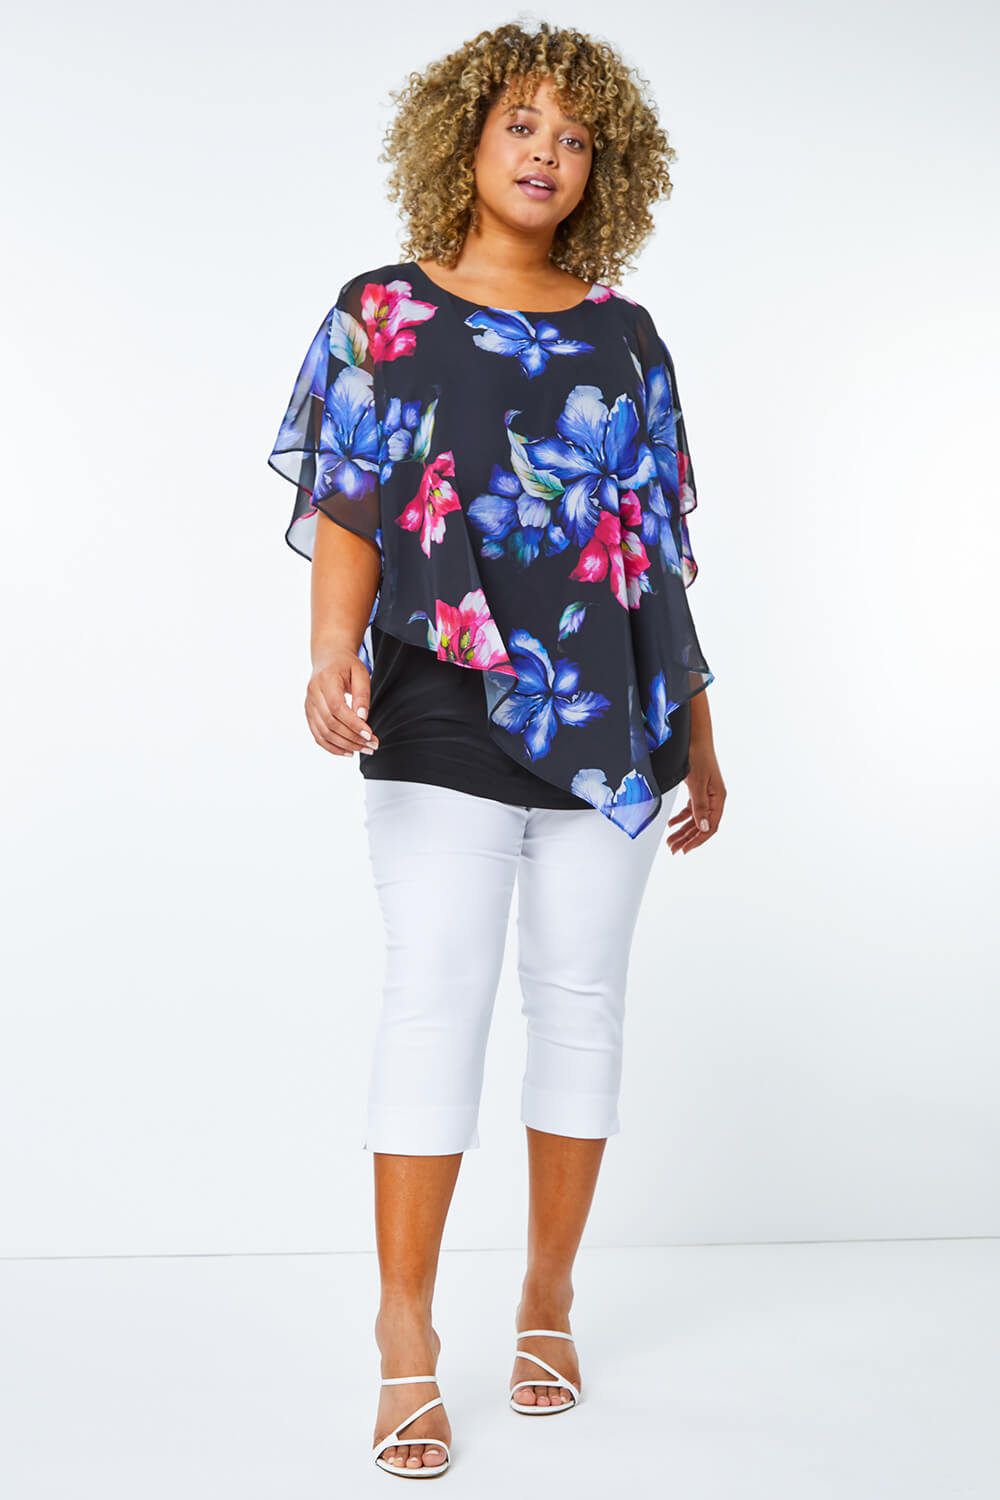 Black Curve Floral Chiffon Overlay Top, Image 2 of 5